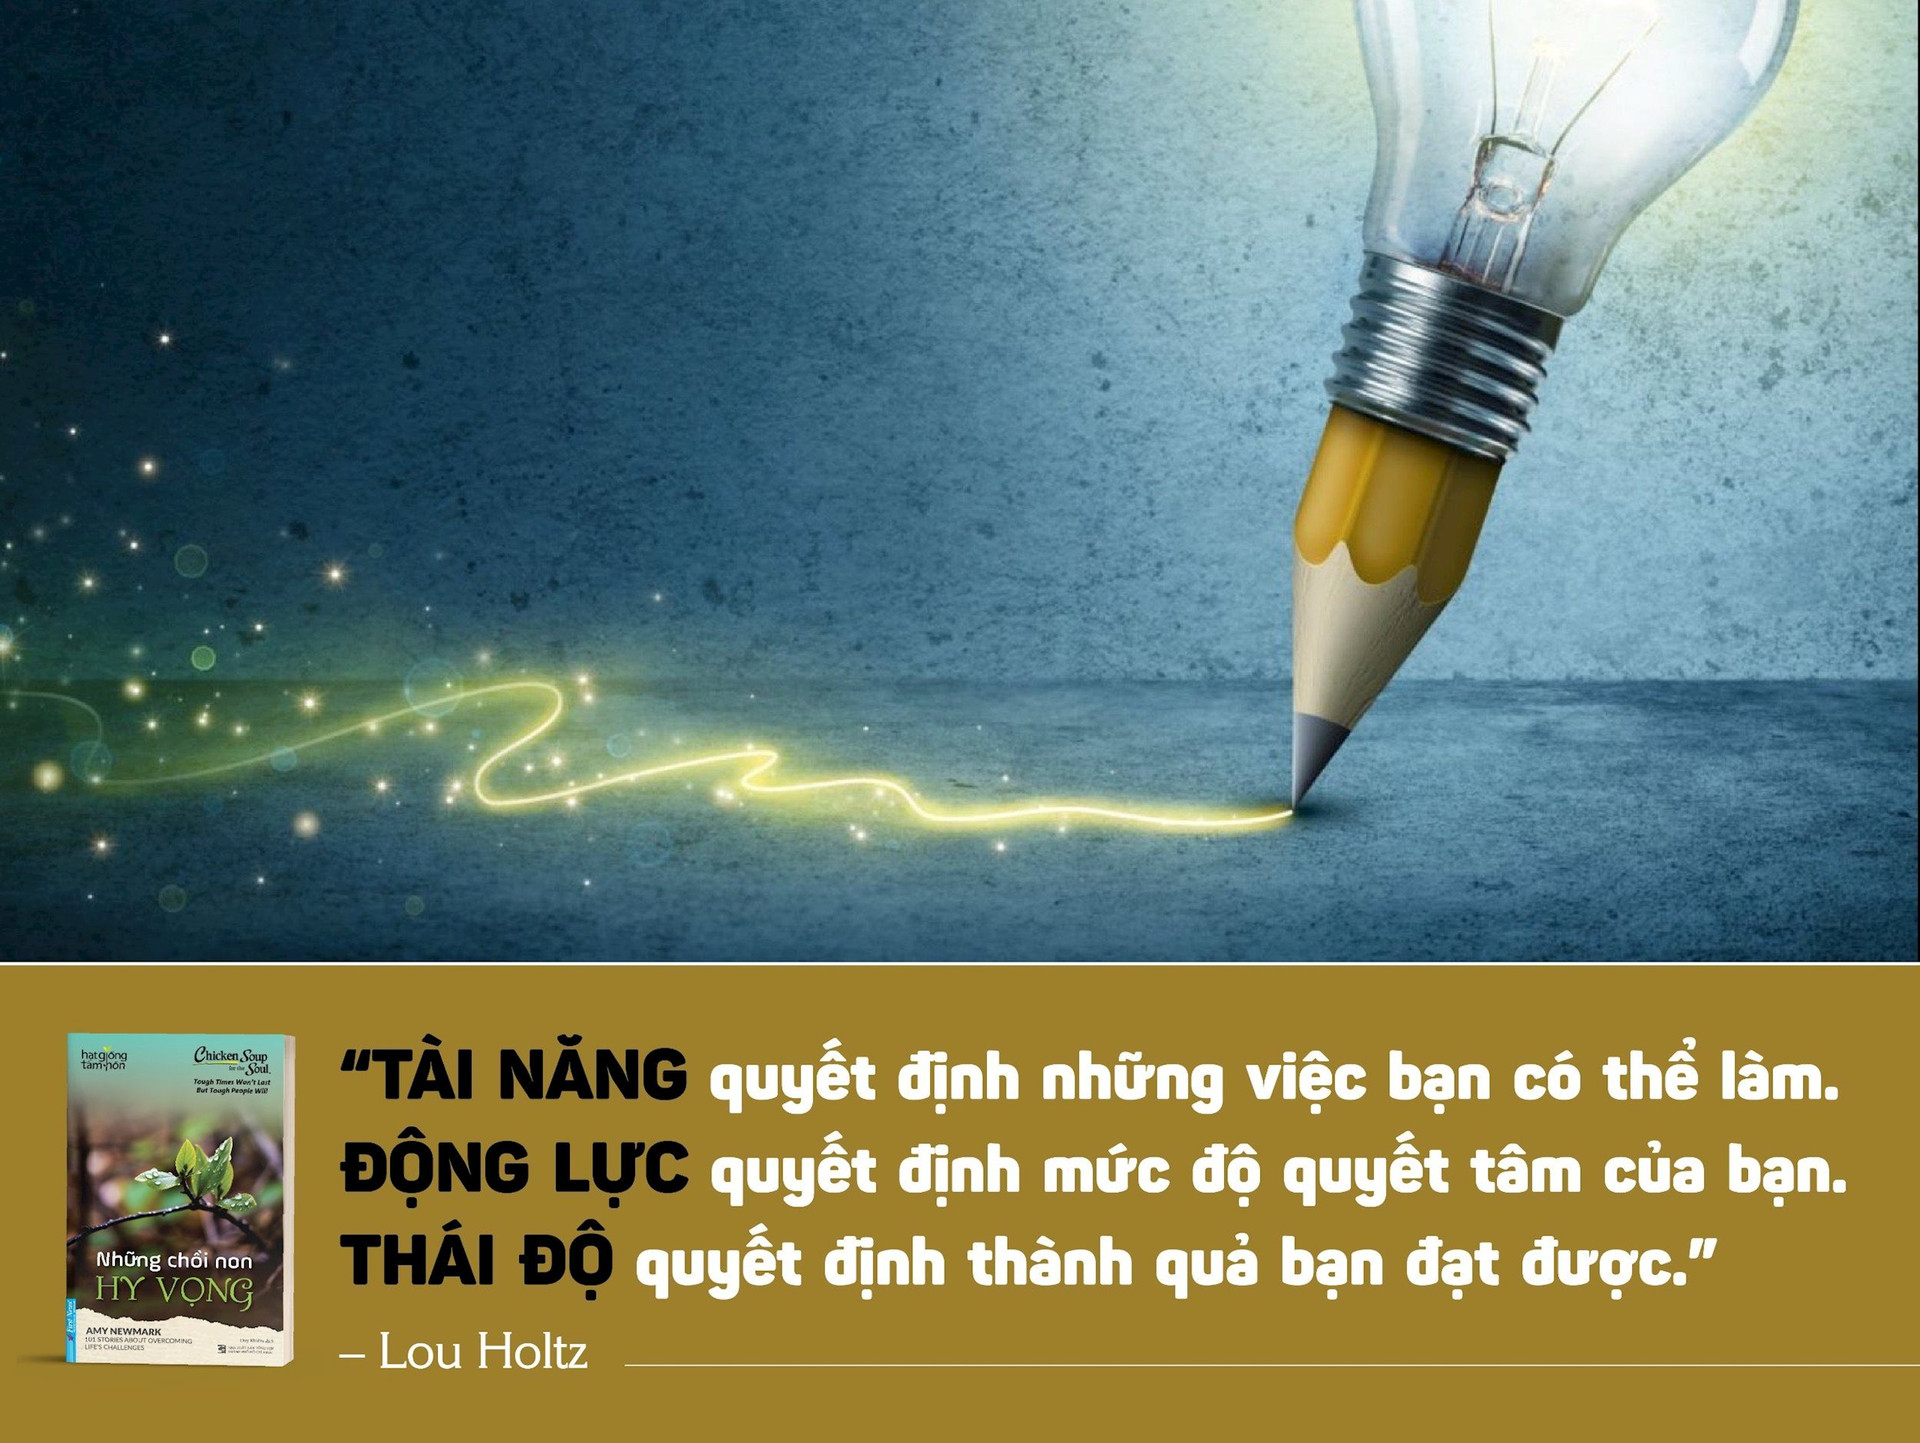 nhungchoinonhivong-quote2a.jpg